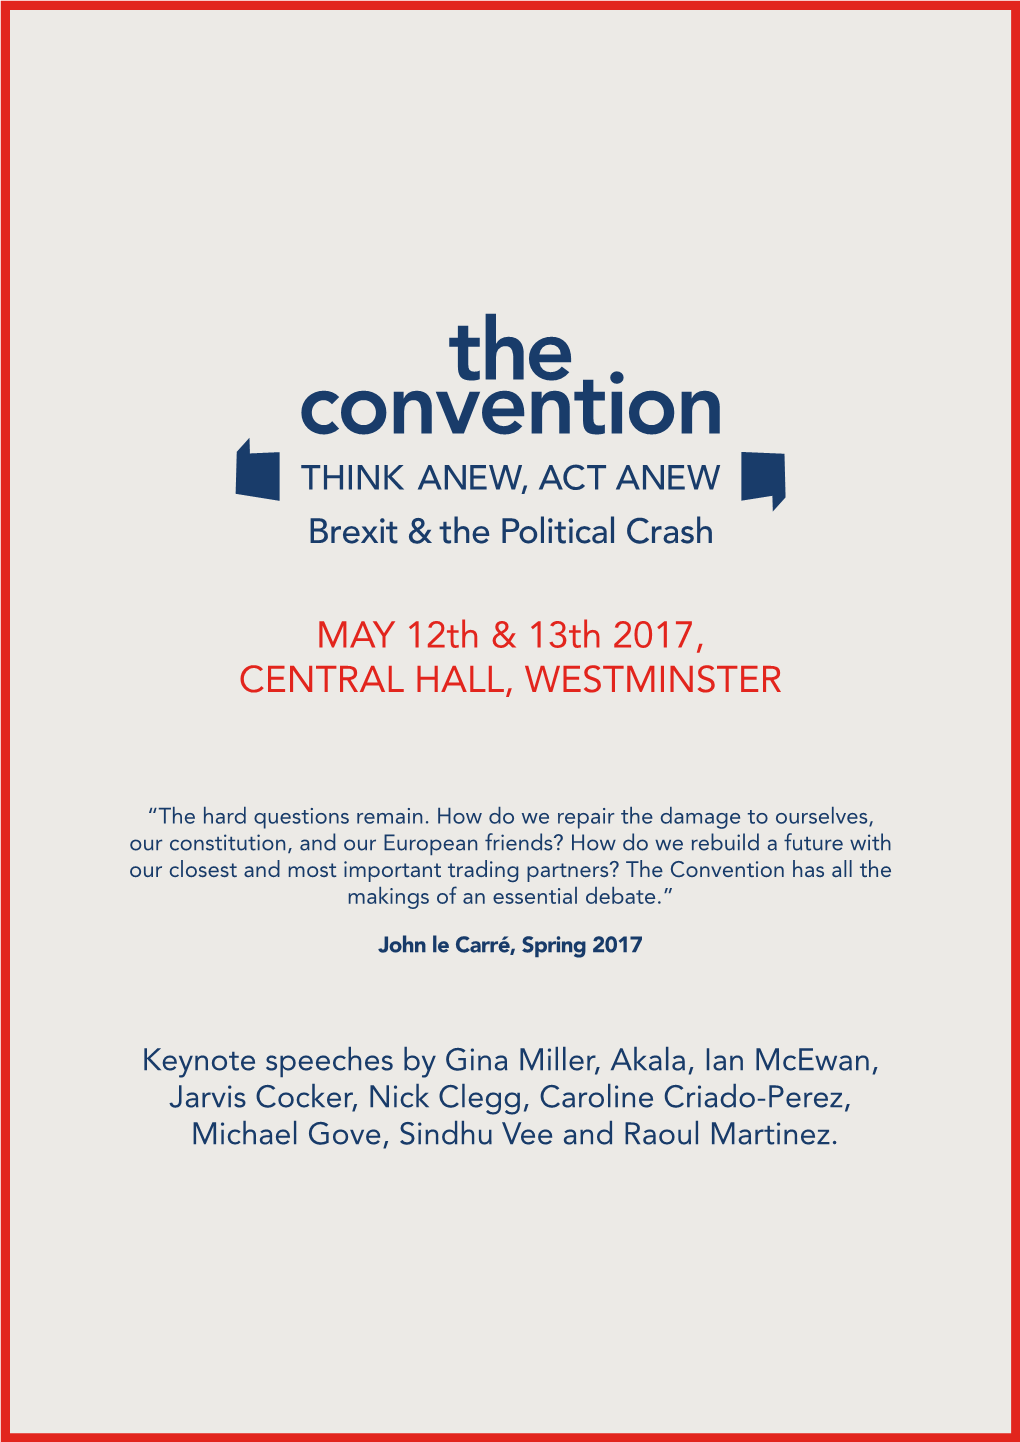 Convention on Brexit and the Political Crash Promises to Be a Rare Occasion at Which a Proper Discussion Can Be Had and Real Progress Made